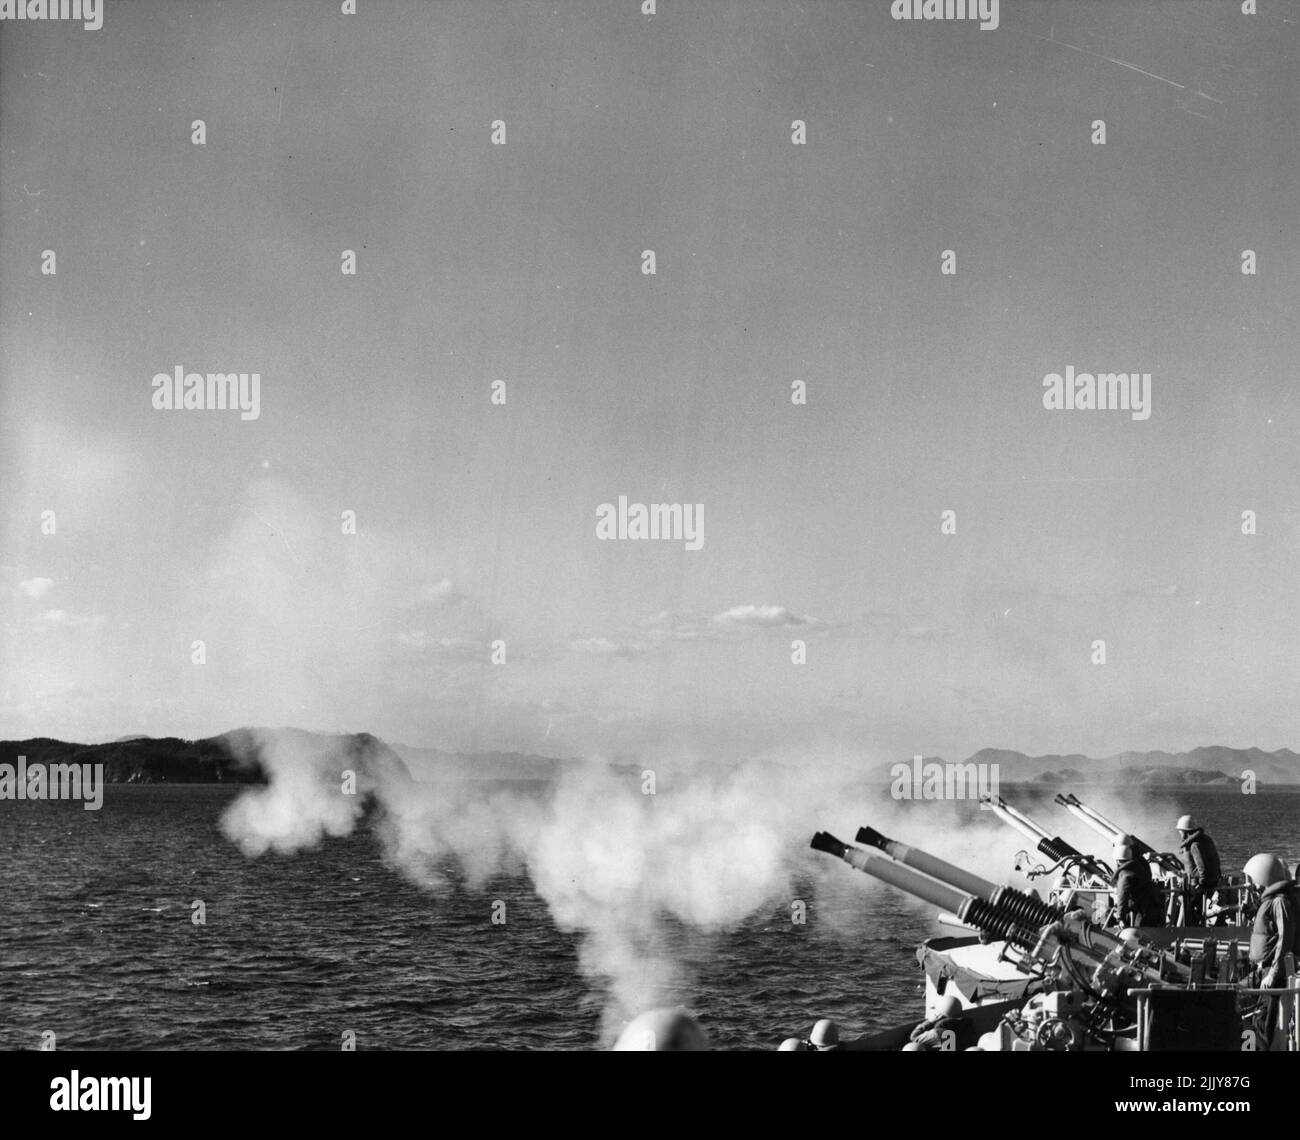 ***** above on the heavy cruiser USS Los Angeles ***** in readiness towards ***** gun ***** Monsan. Hanging in the air the smoke from the five and sight inch guns that pounded Wonsan for more than eight continuous hours the previous day. October 23, 1951. (Photo by Official U.S. Navy Photograph) Stock Photo